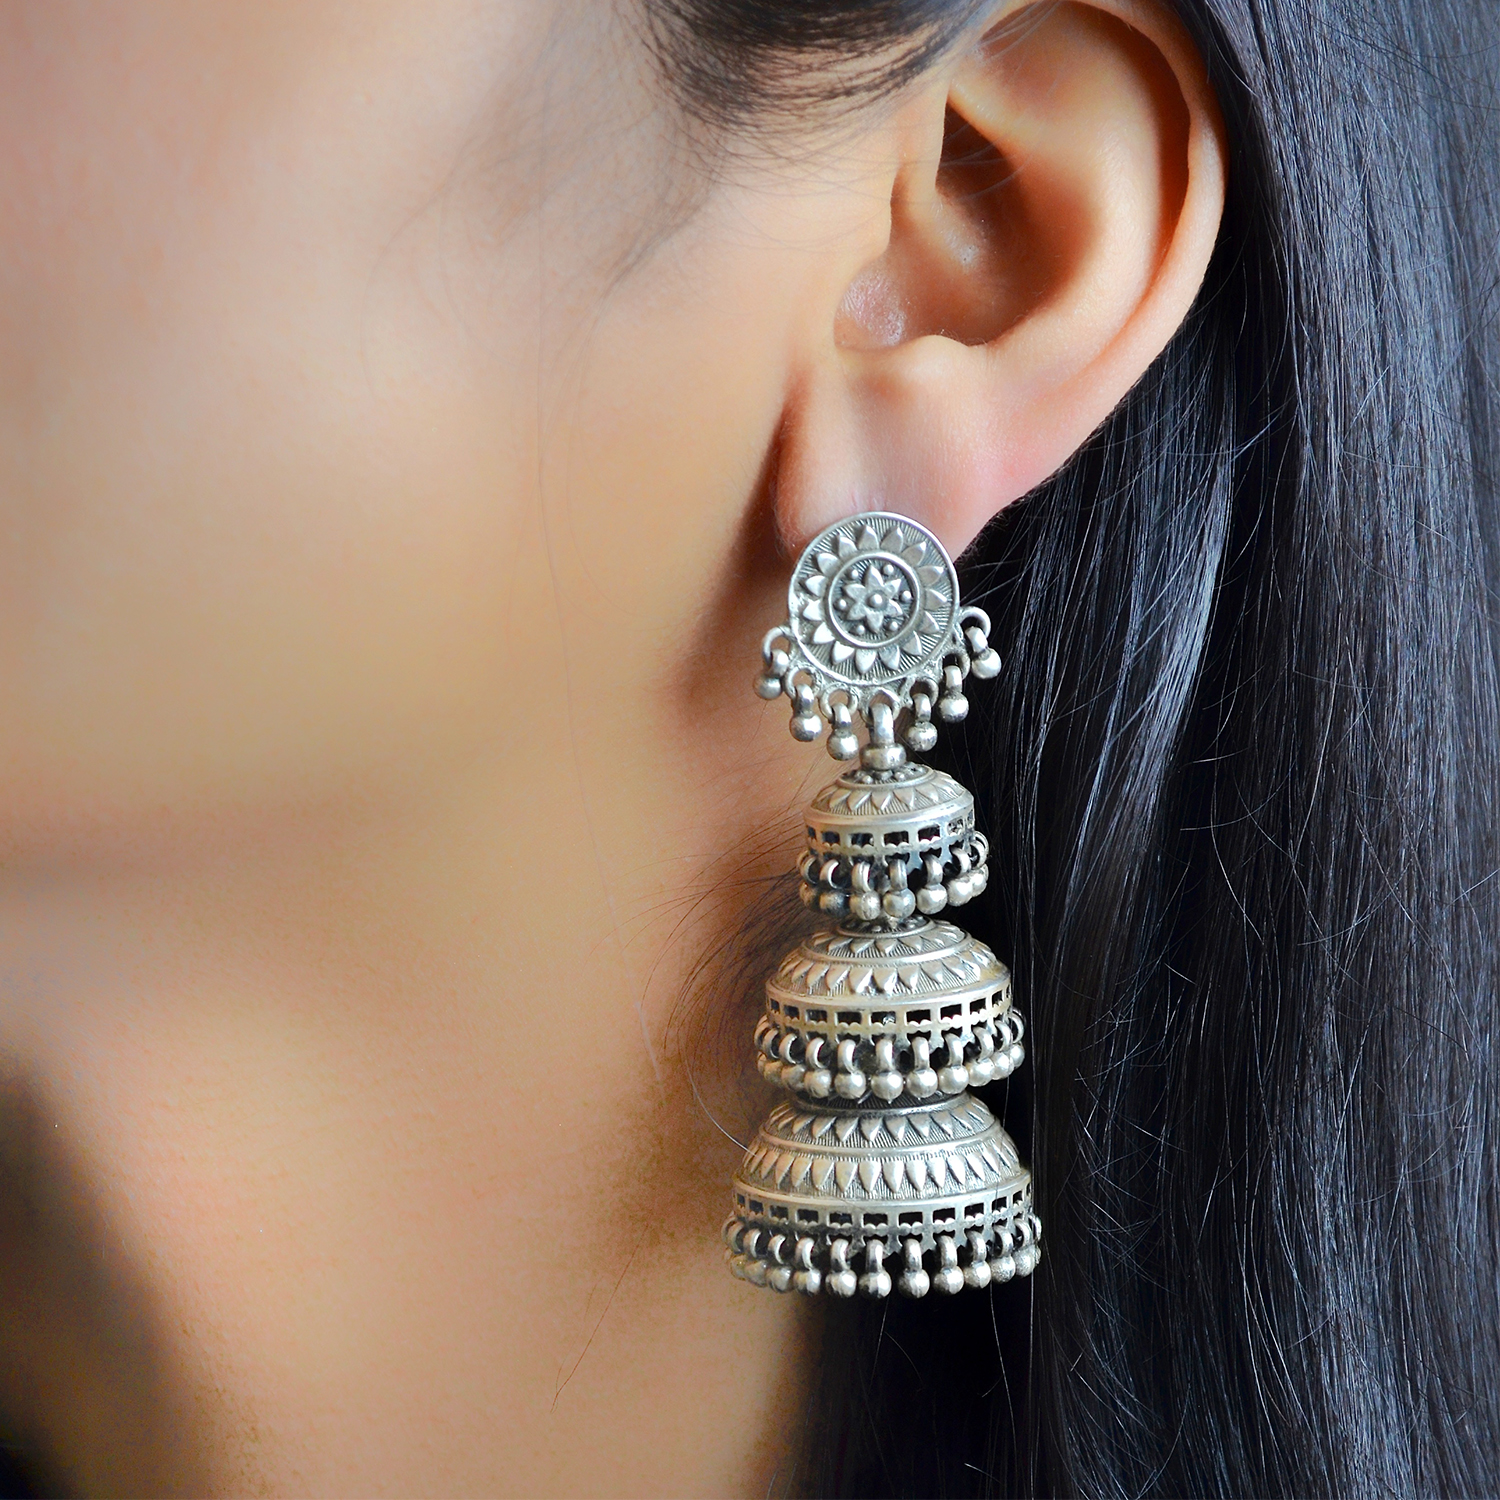 Where to start your ear stack | Laura Bond Jewellery